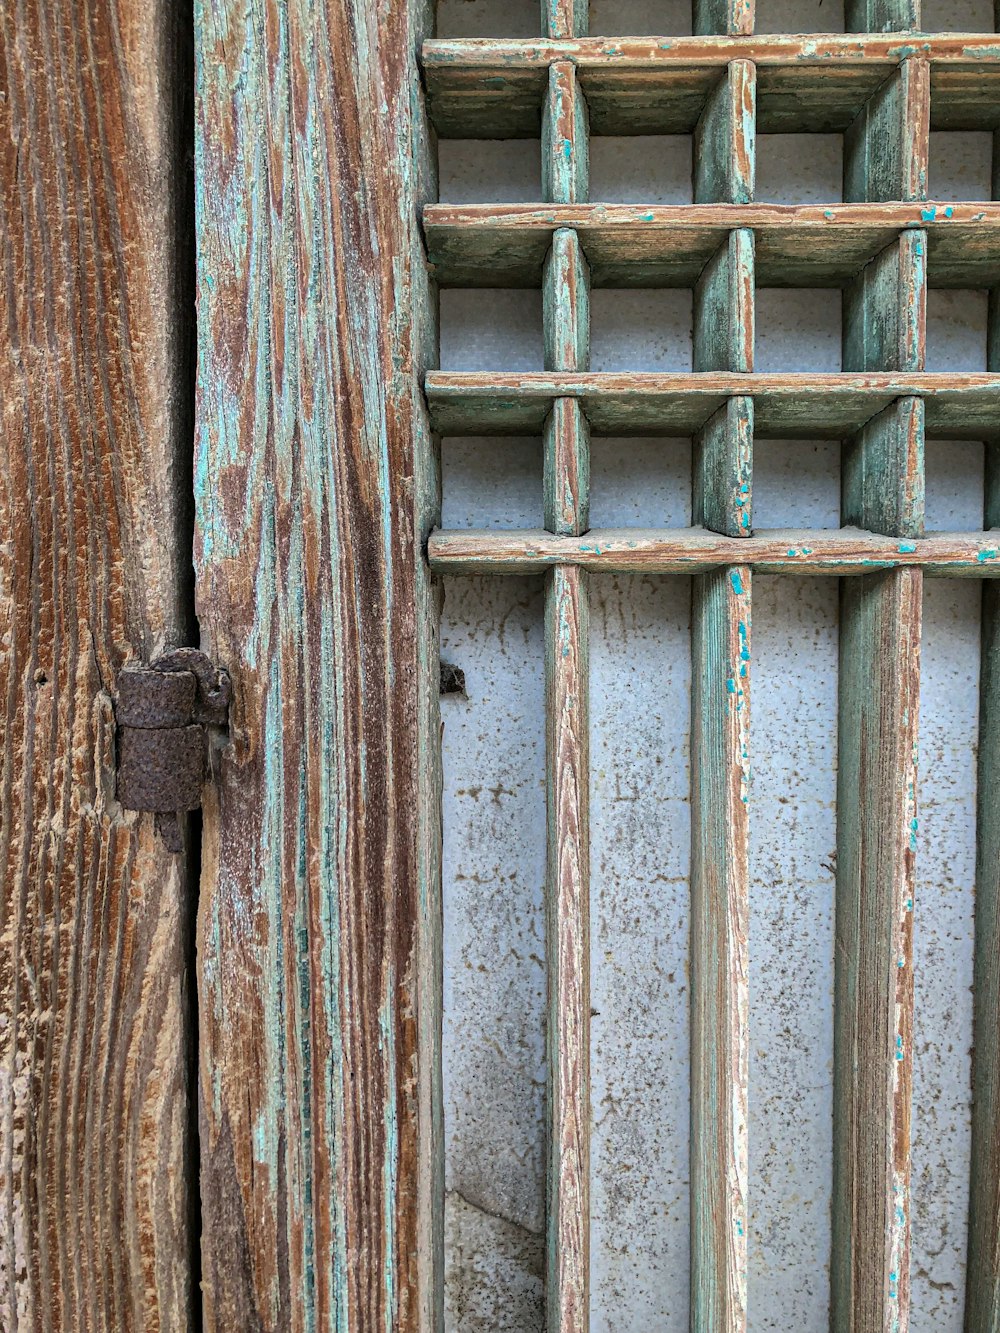 a close up of a wooden door with bars